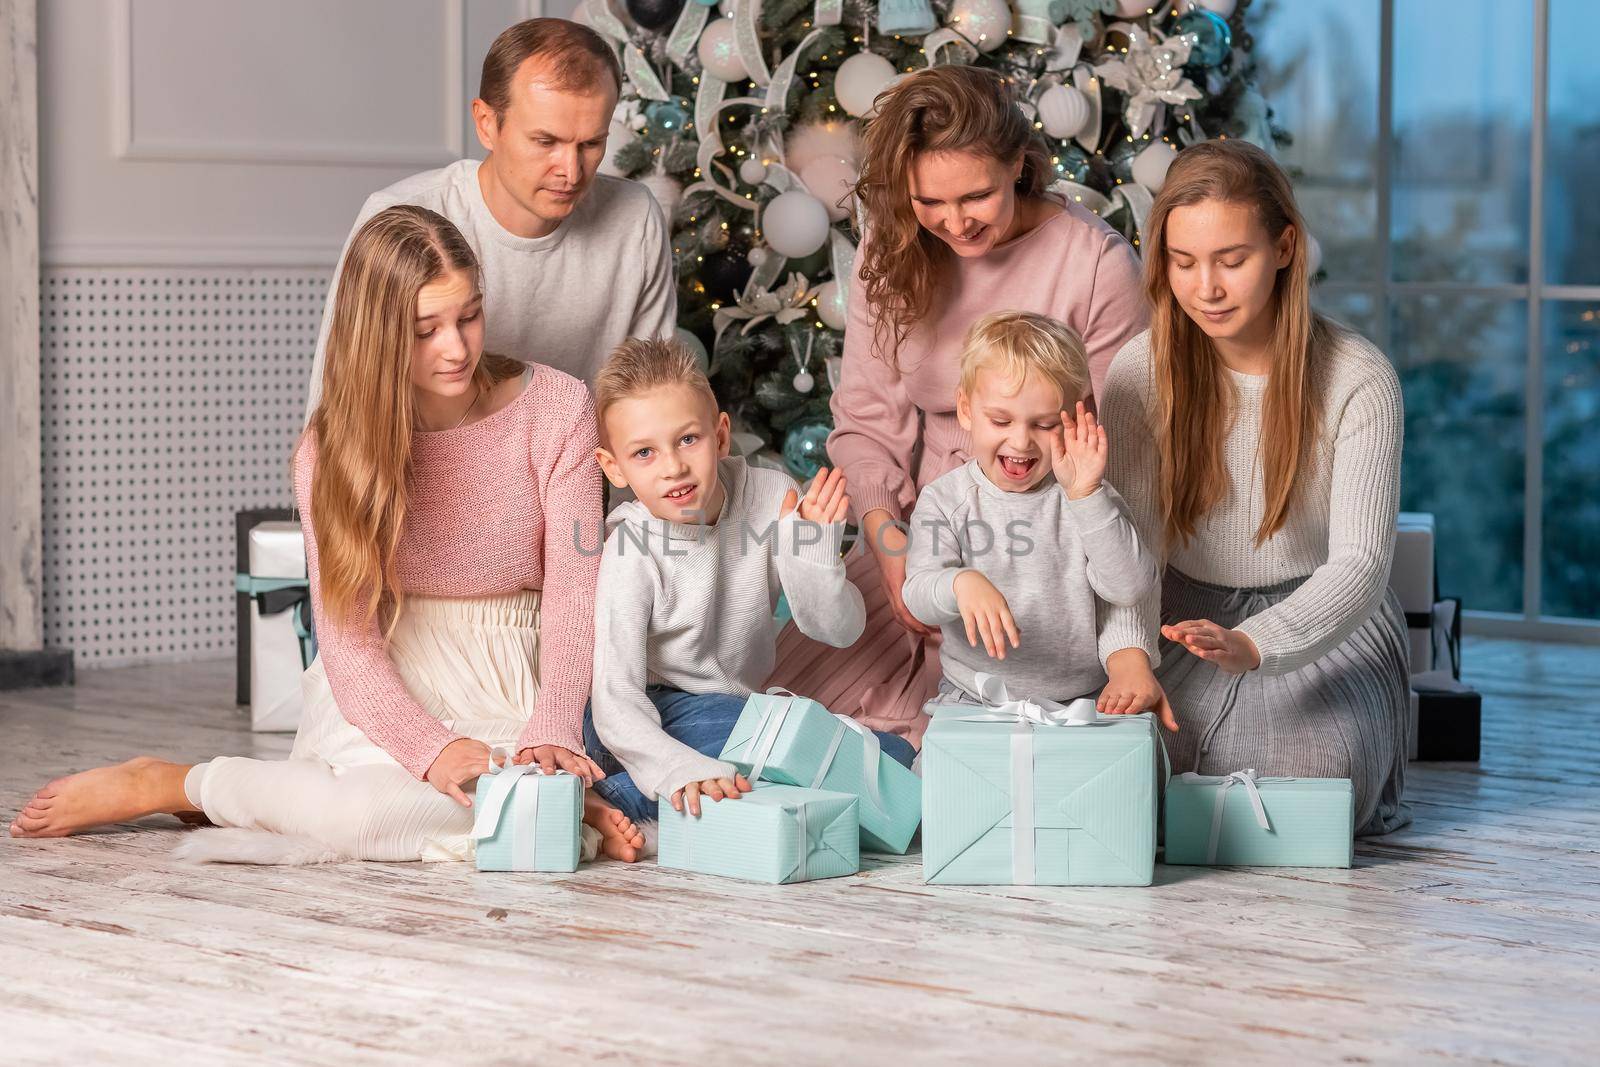 Big Happy family with many kids having fun and opening presents under the Christmas tree. Christmas family eve, christmas mood concept